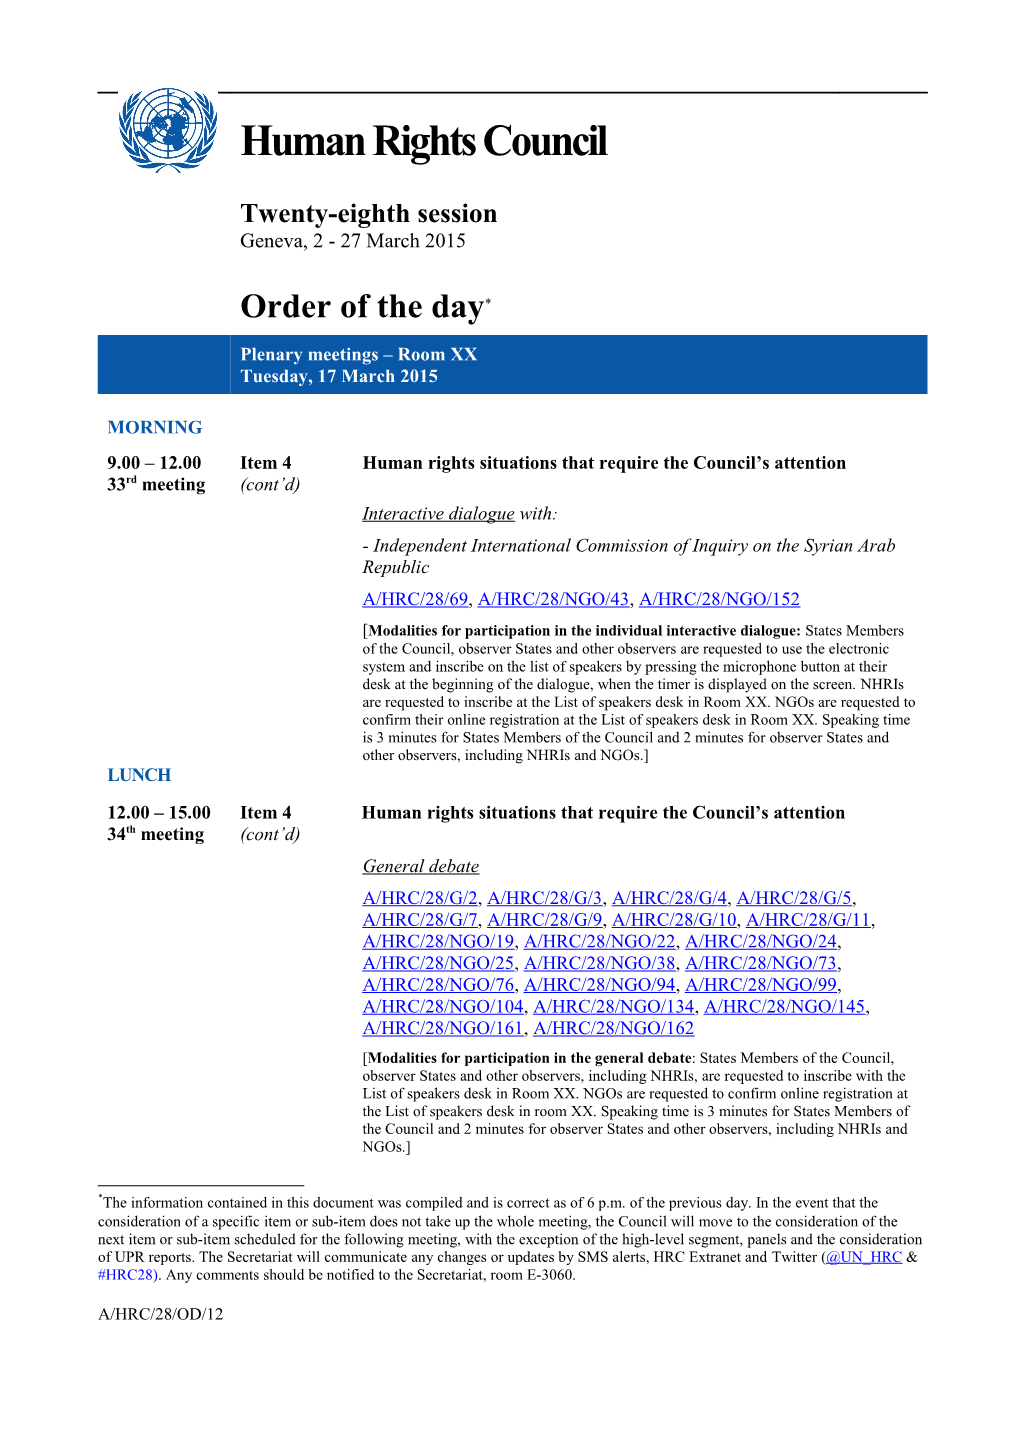 Order of the Day, Tuesday, 17 March 2015 (Word)